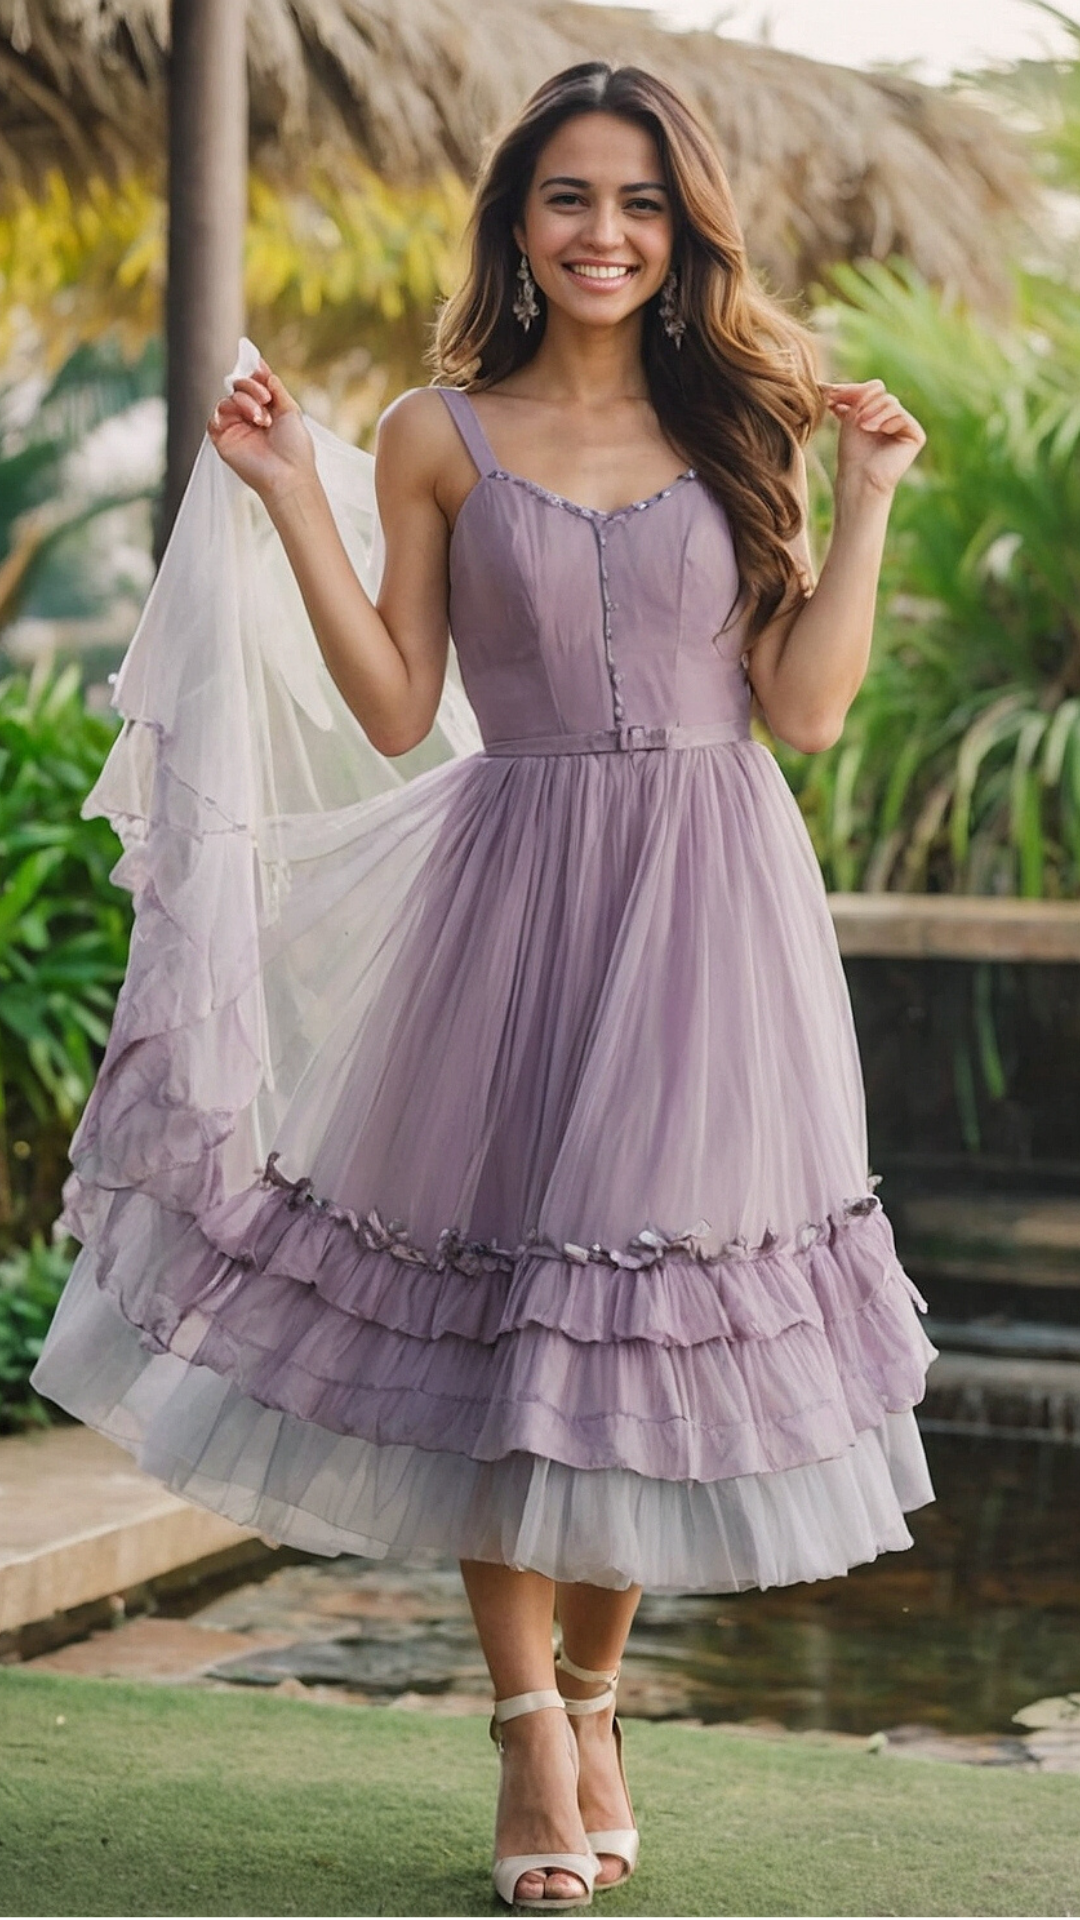 Daydream Delight: Whimsical Frock Styles